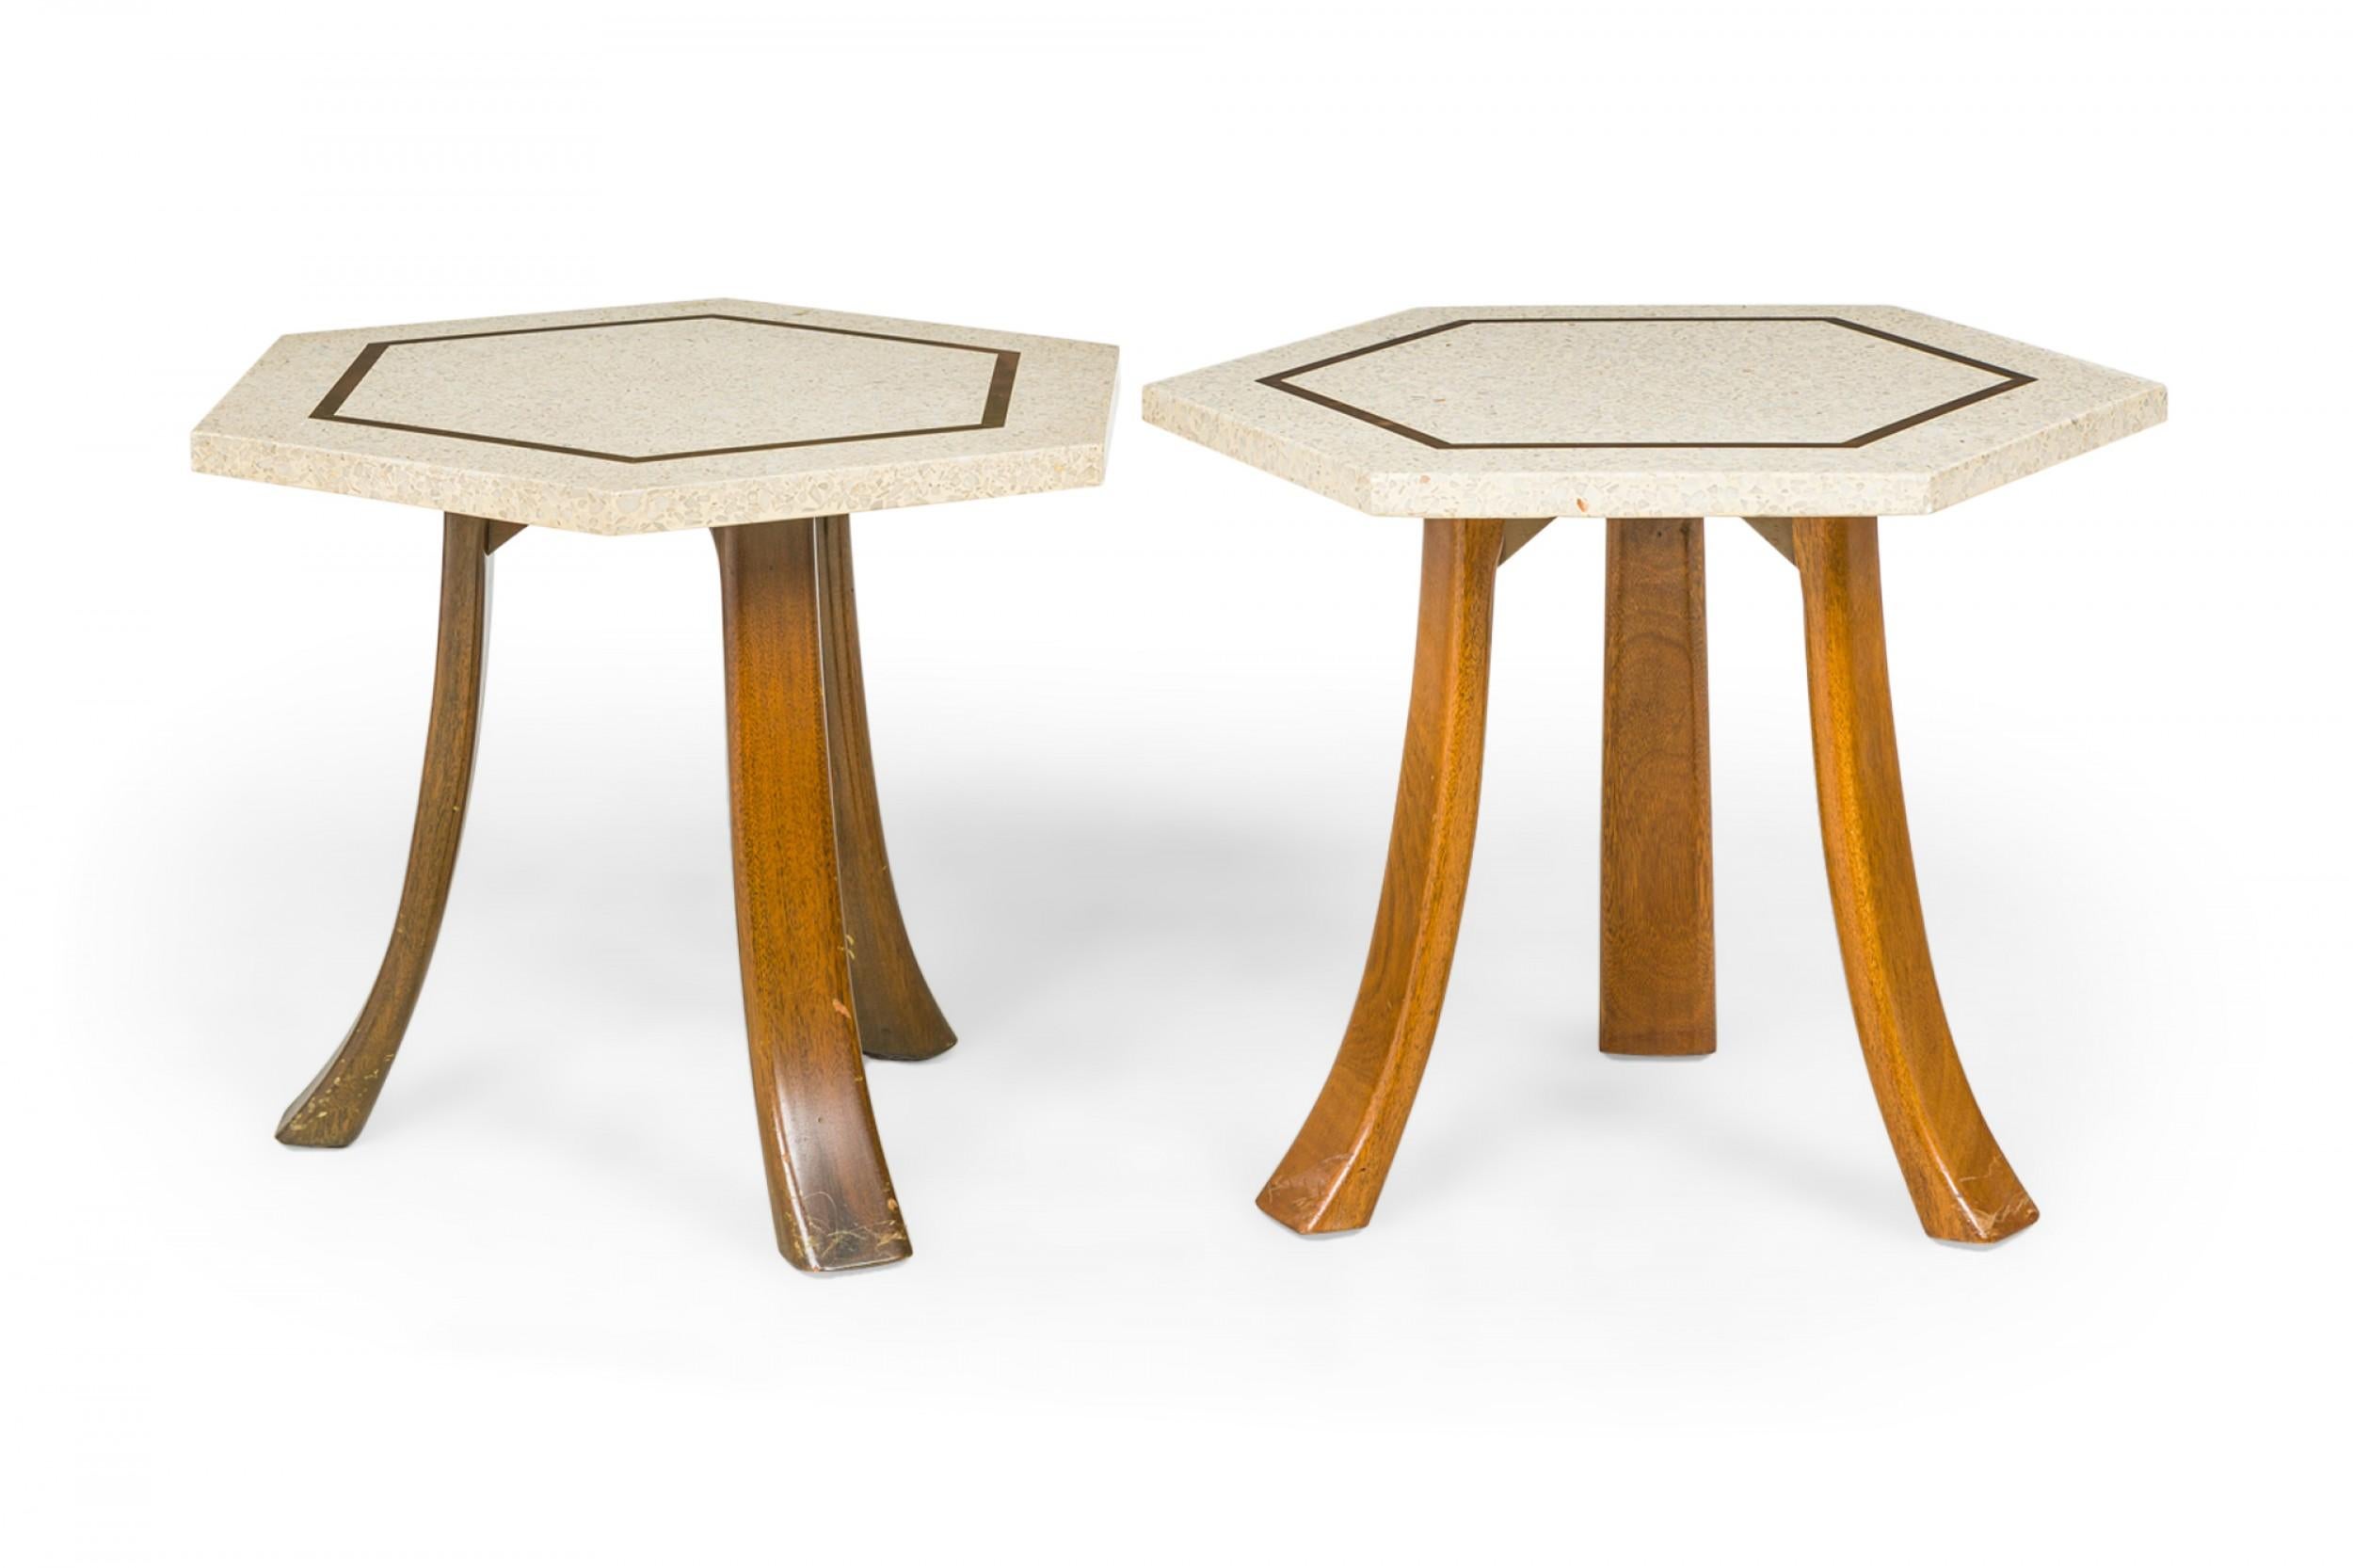 2 American mid-century end / side tables with hexagonal white terrazzo tops with a bronze inlaid hexagonal design supported on three curved wooden legs. (Harvey Probber)(Priced Each)(Similar tables: DUF0356A-E).
    